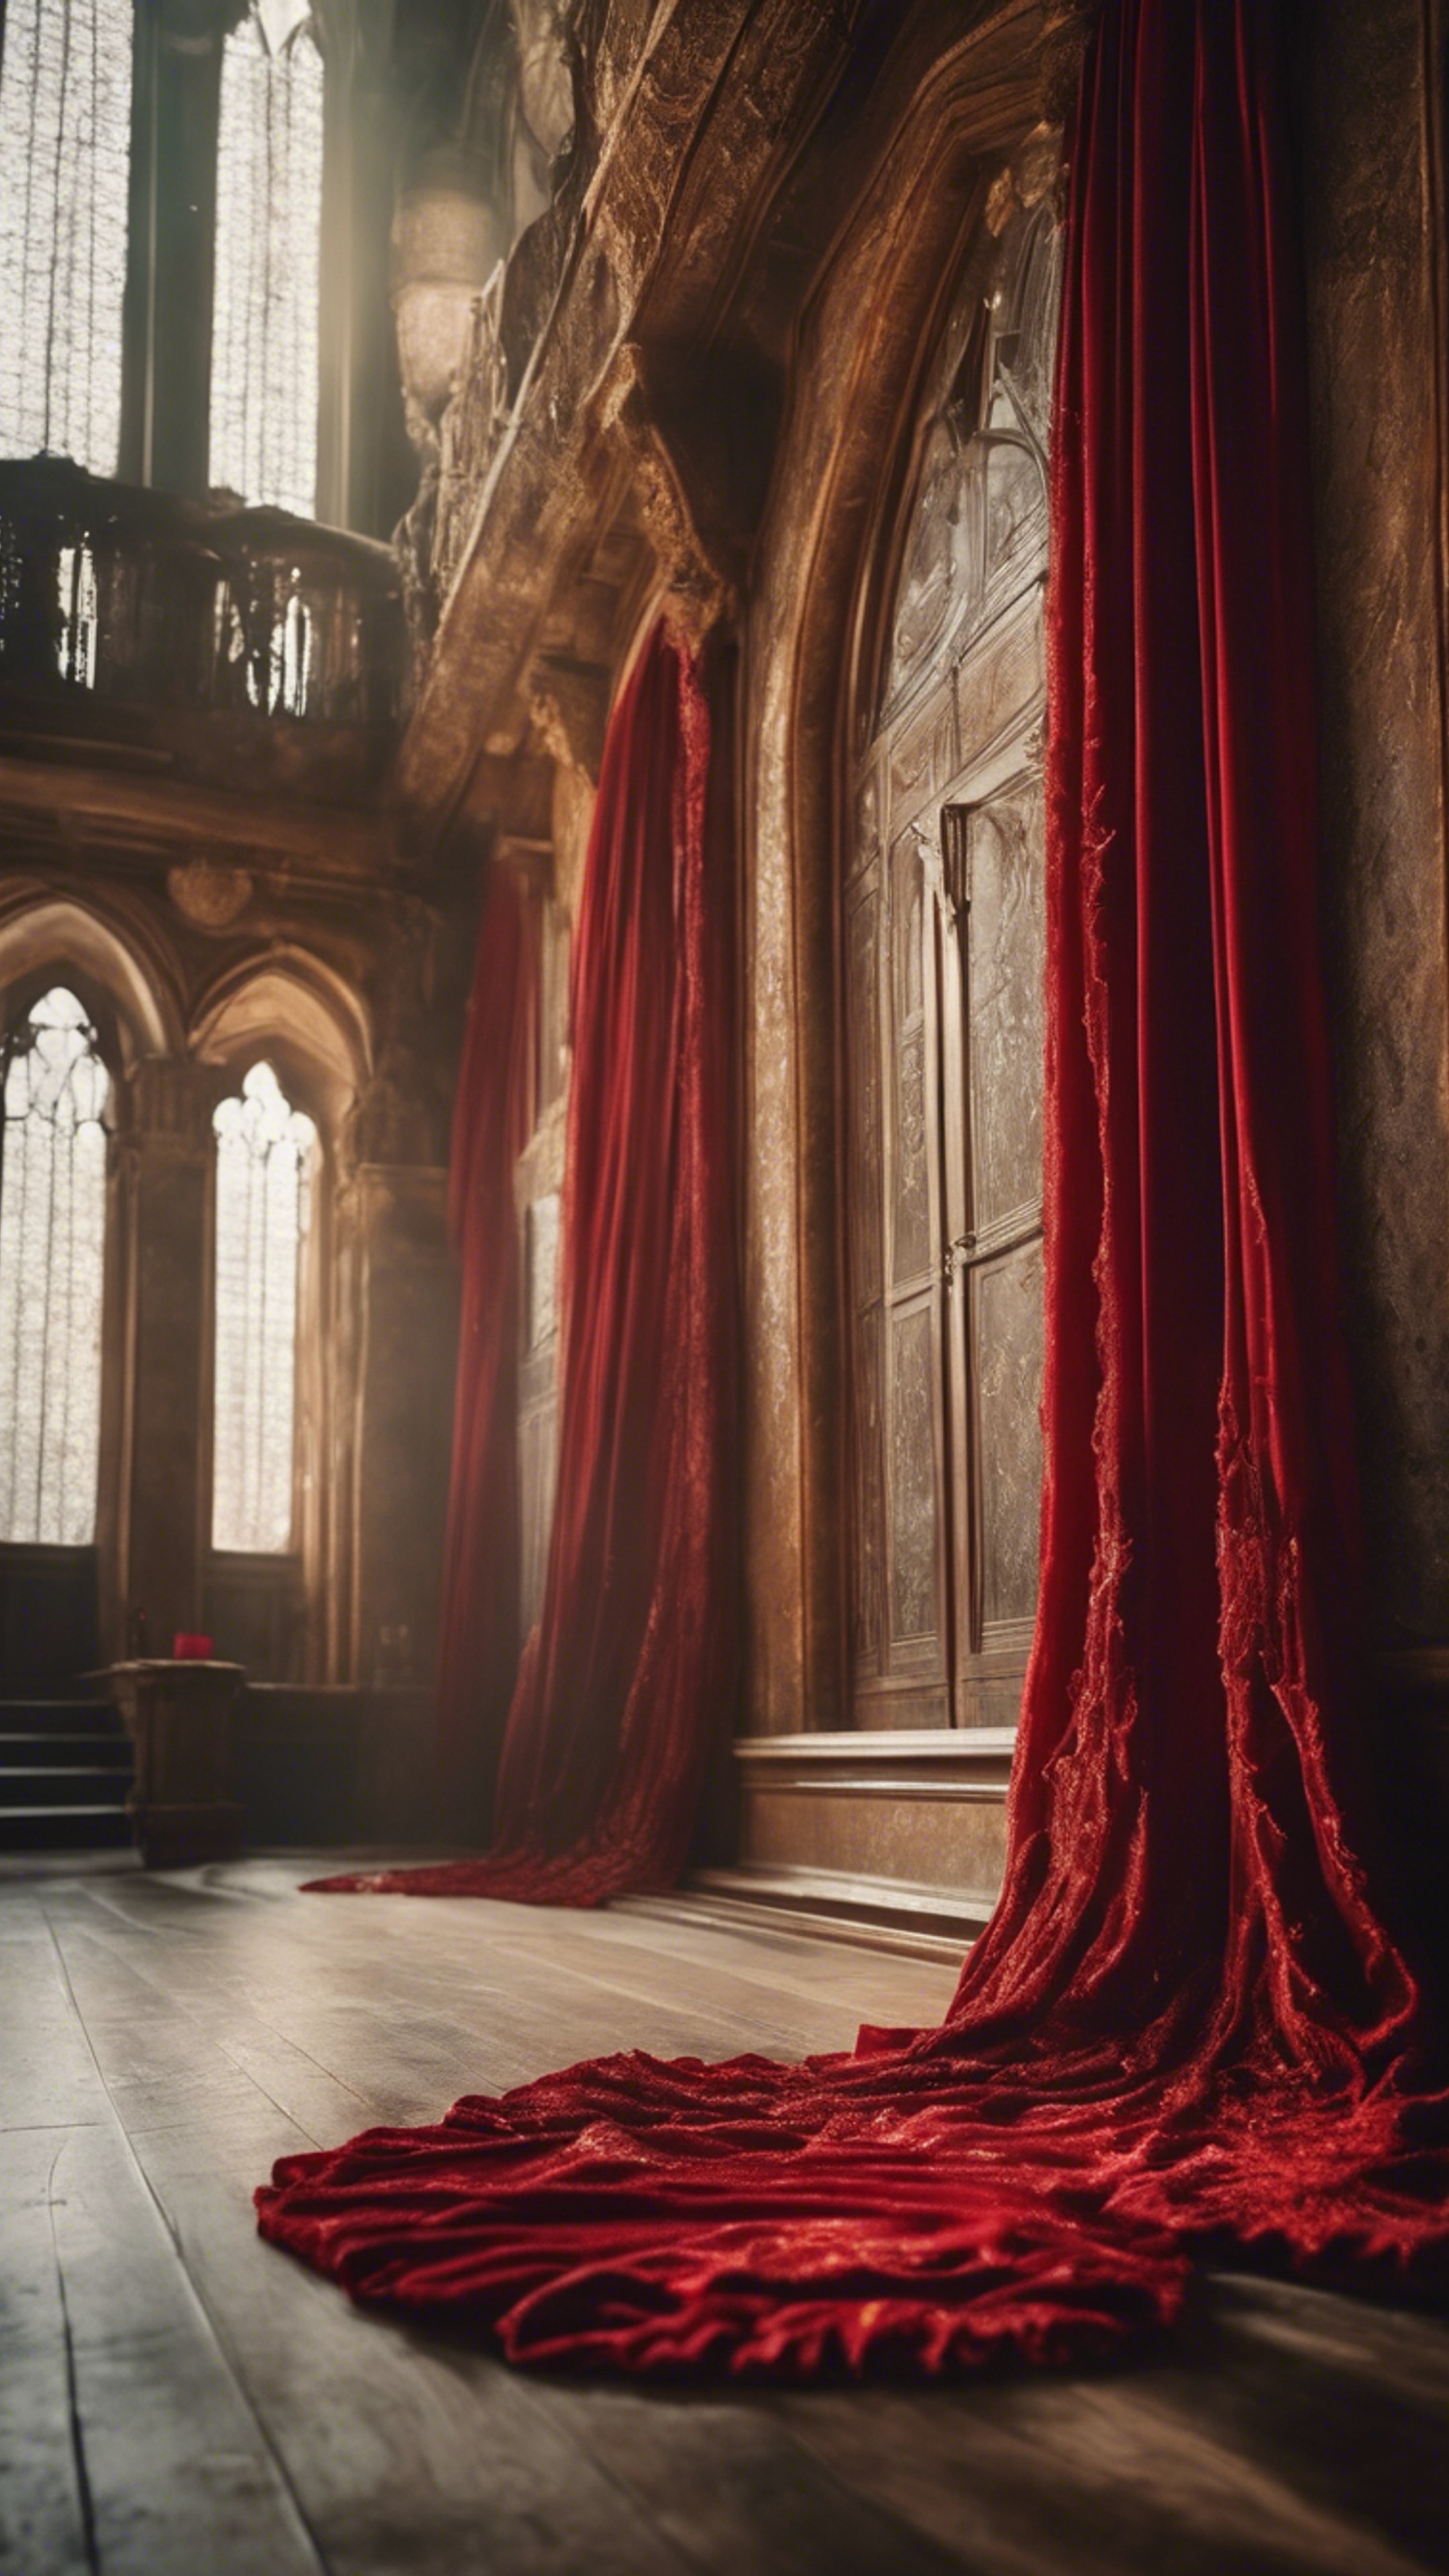 Golden-hued dust motes drifting through the air in a Gothic castle's grand hall, hitting swathes of red velvet curtains.壁紙[da57075d013744c3bf24]